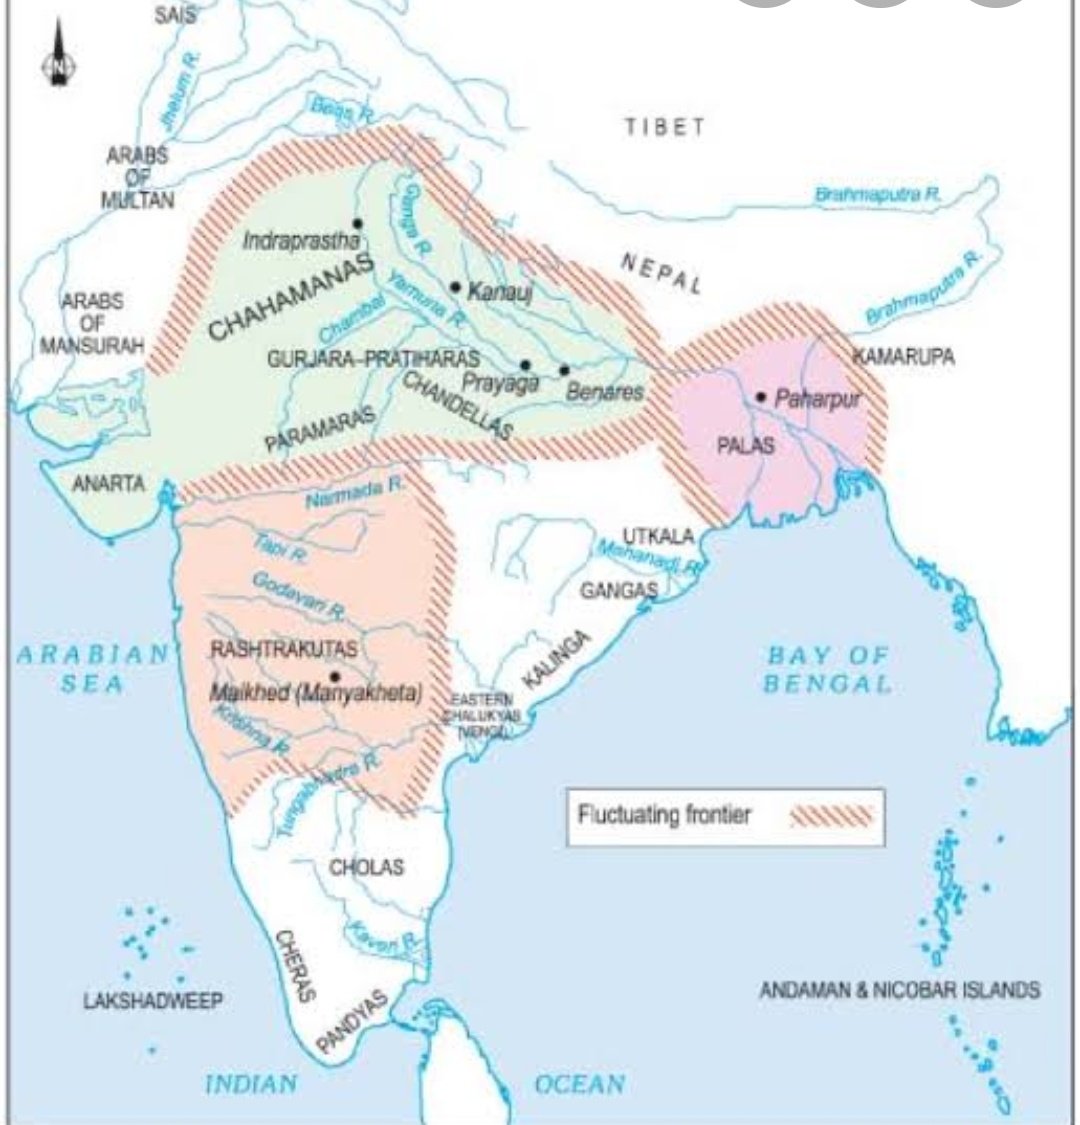  #ThreadRashtrakut Dynasty:Builder of Mighty Kailash TempleWhen Indra III attacked Pratihars, it lead to re-establishment of Rashtrakut but the real founder of Kingdom was Dantidurga. He settled his capital in Malkhed near Sholapur. Rashtrakut became immensely powerful but could